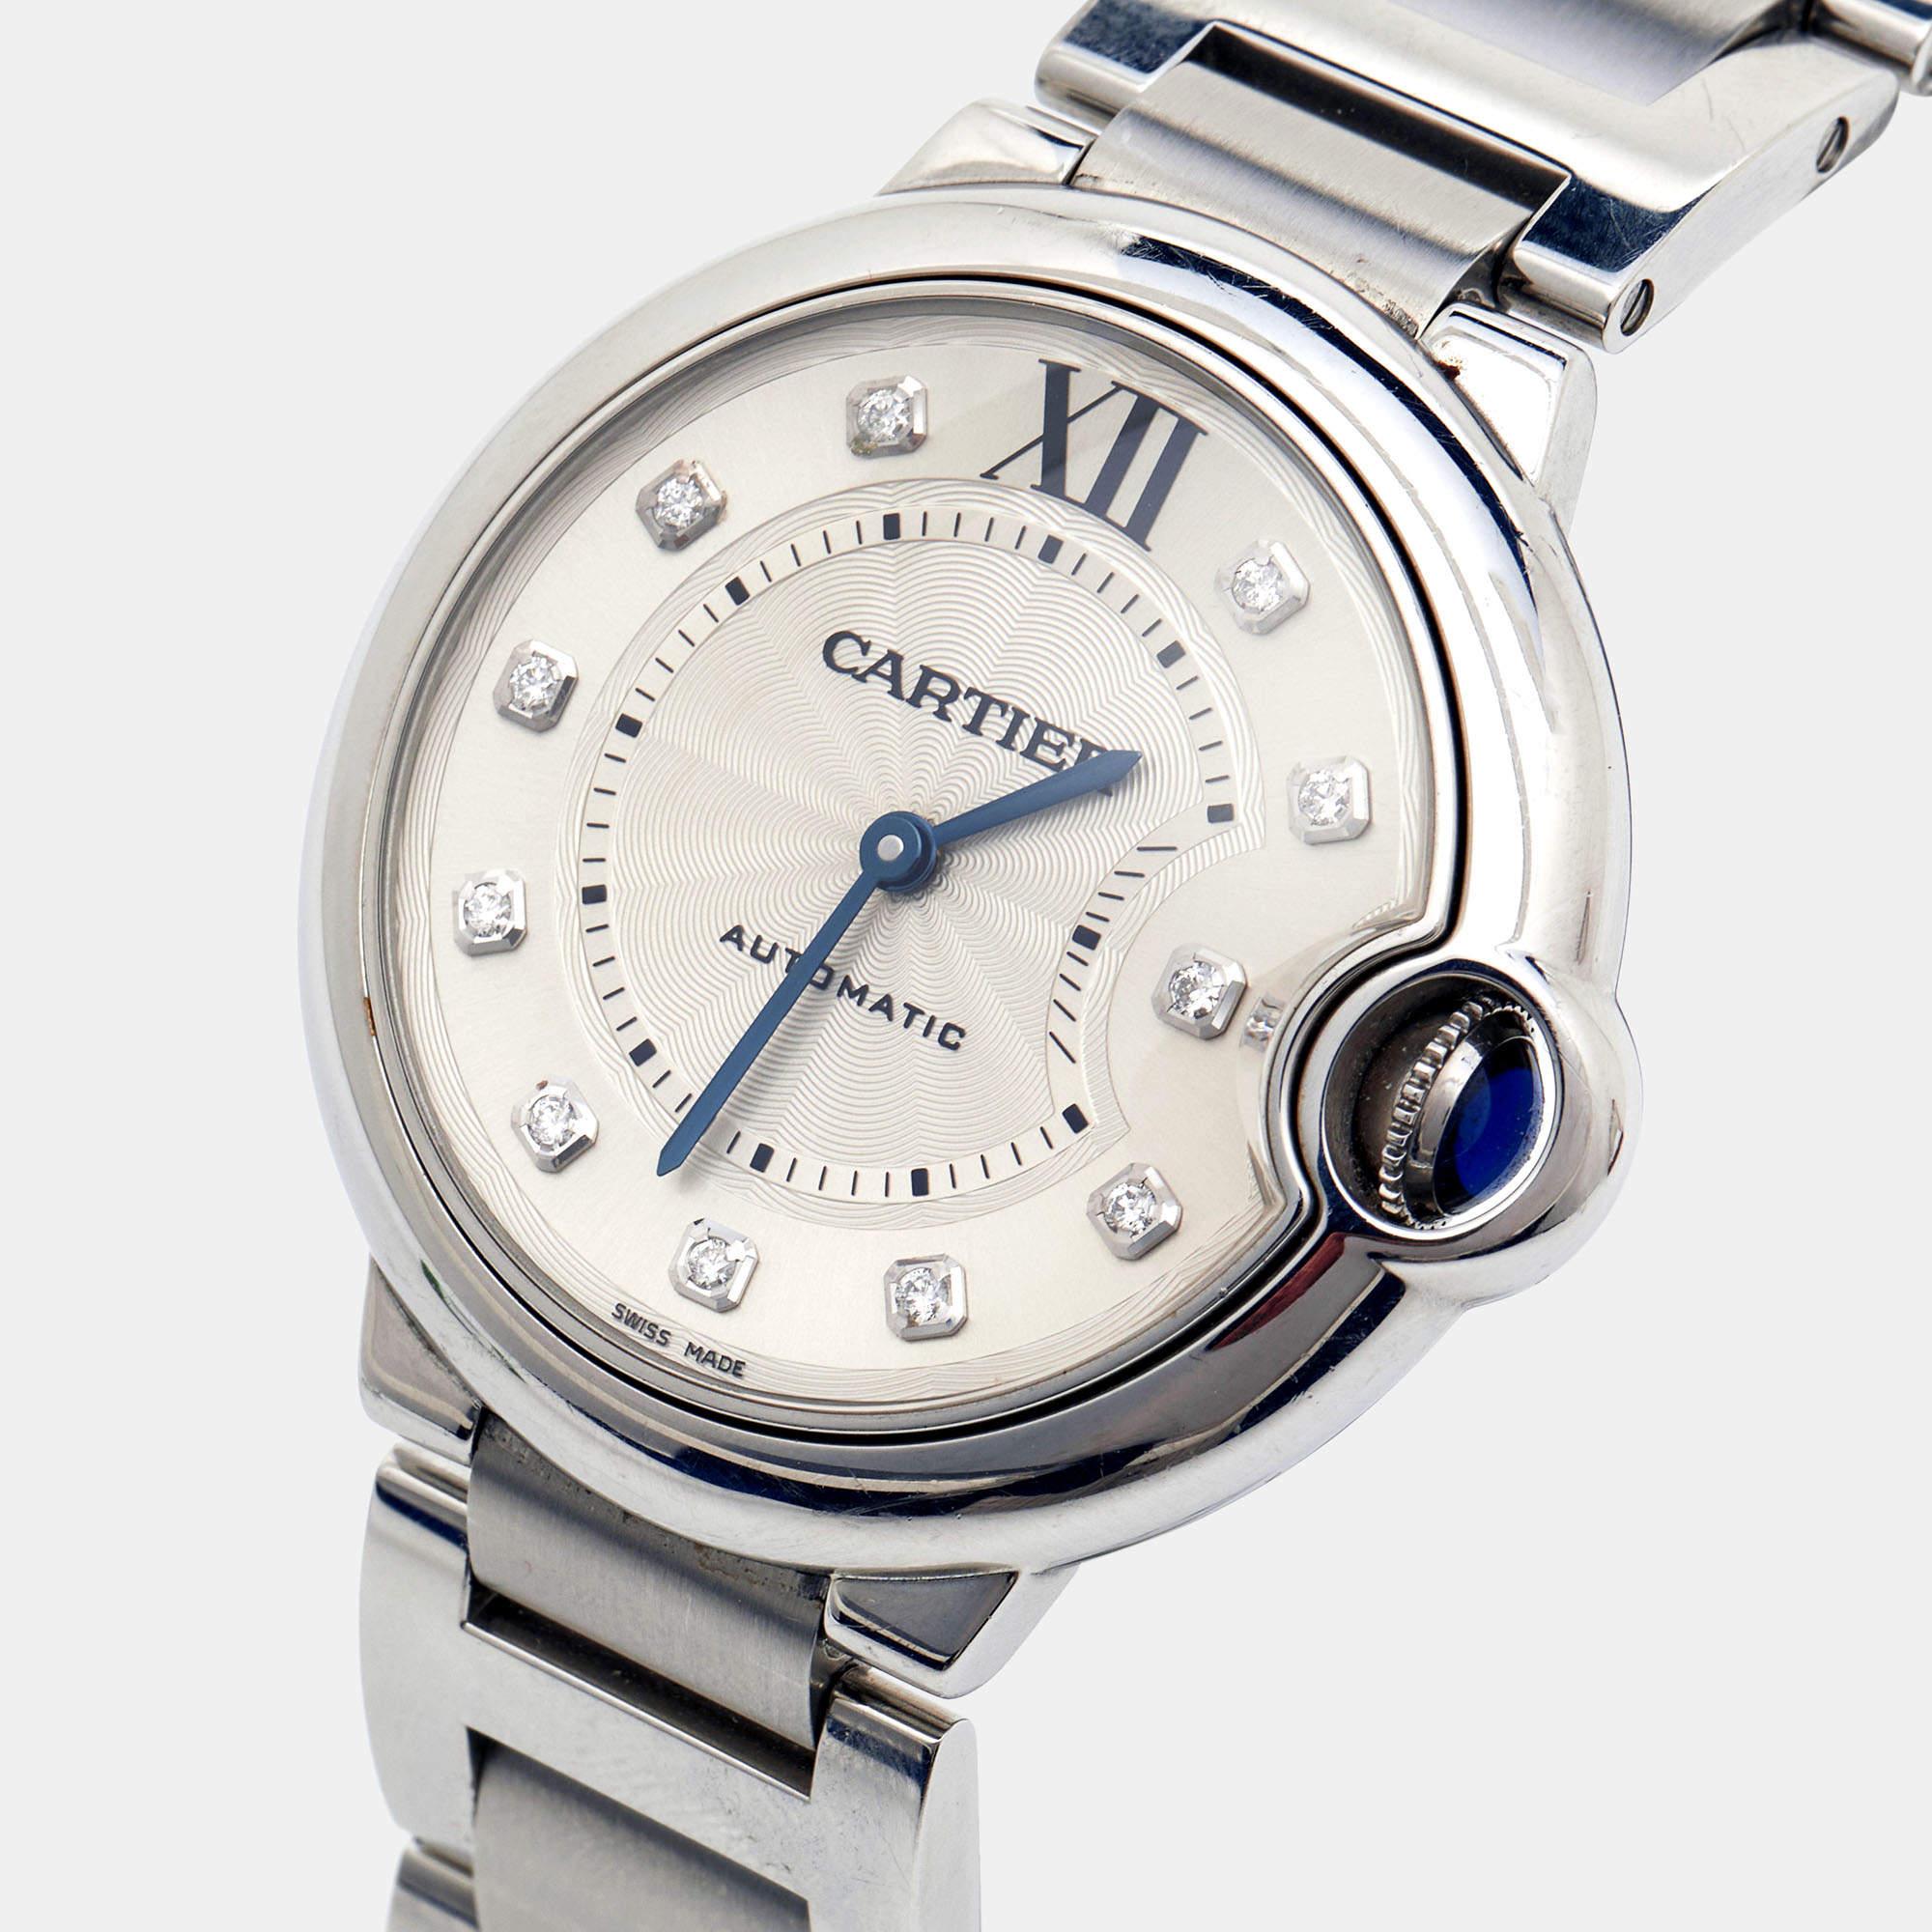 First created in 2007, the Cartier Ballon Bleu watch is a song of details and harmony. The now-iconic watch gets its identity from the guarded blue bubble of the winding crown on the side. The Ballon Bleu WE902075 watch we have here is for women,